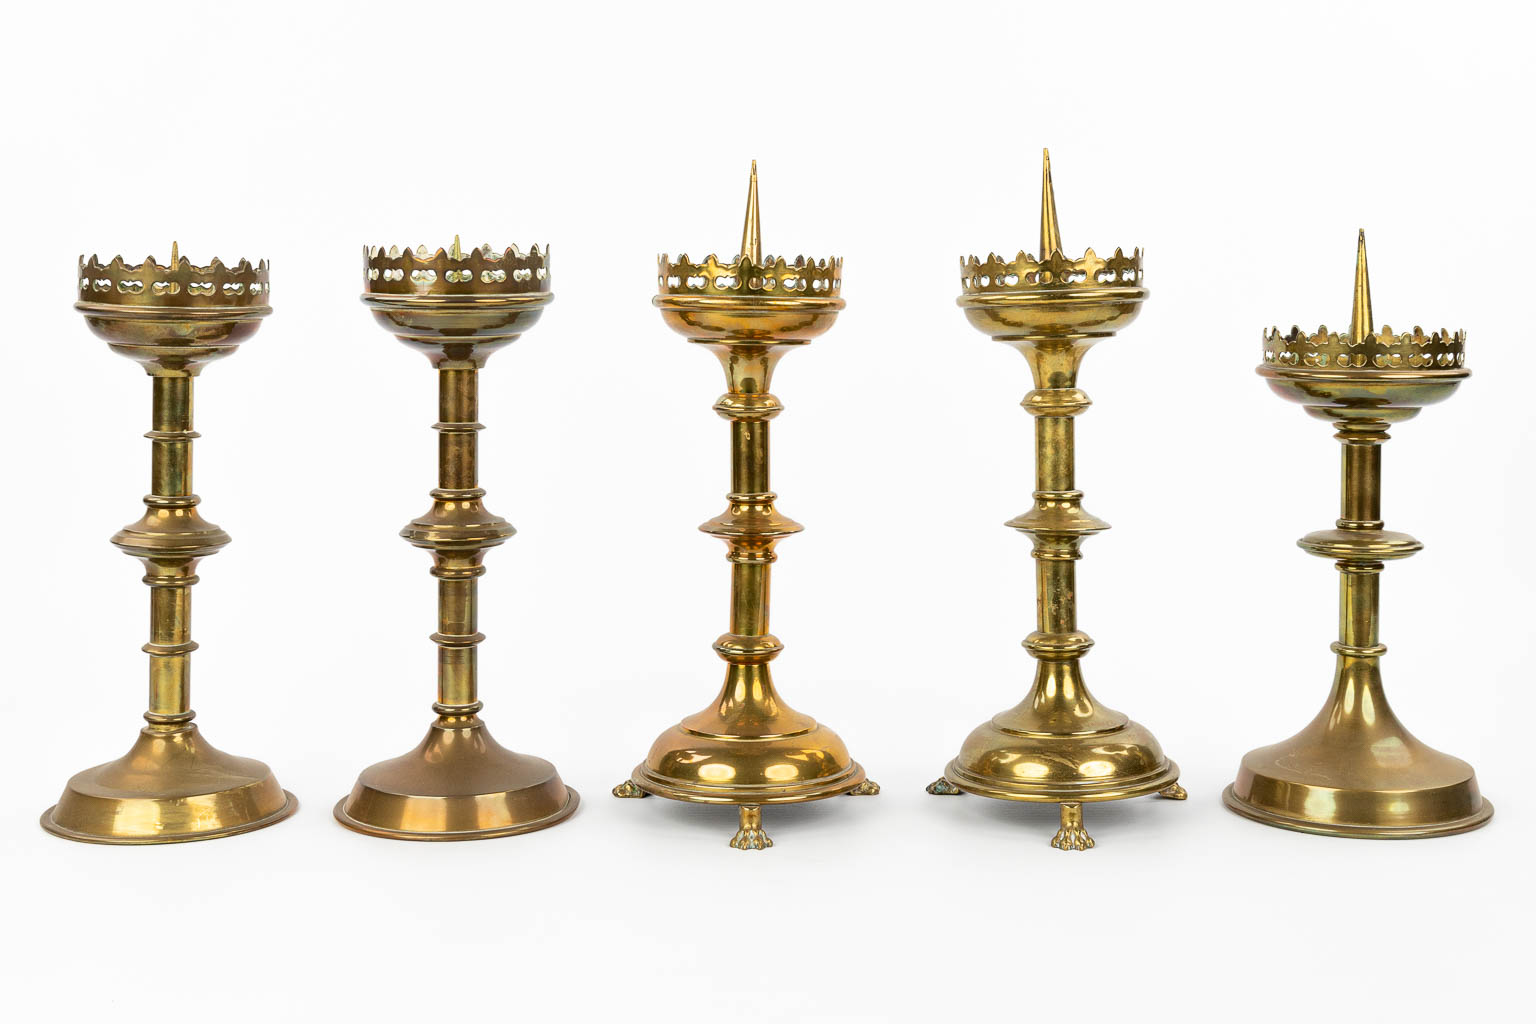 A collection of 5 candlesticks made of bronze and copper in neogothic style. (H:32cm)